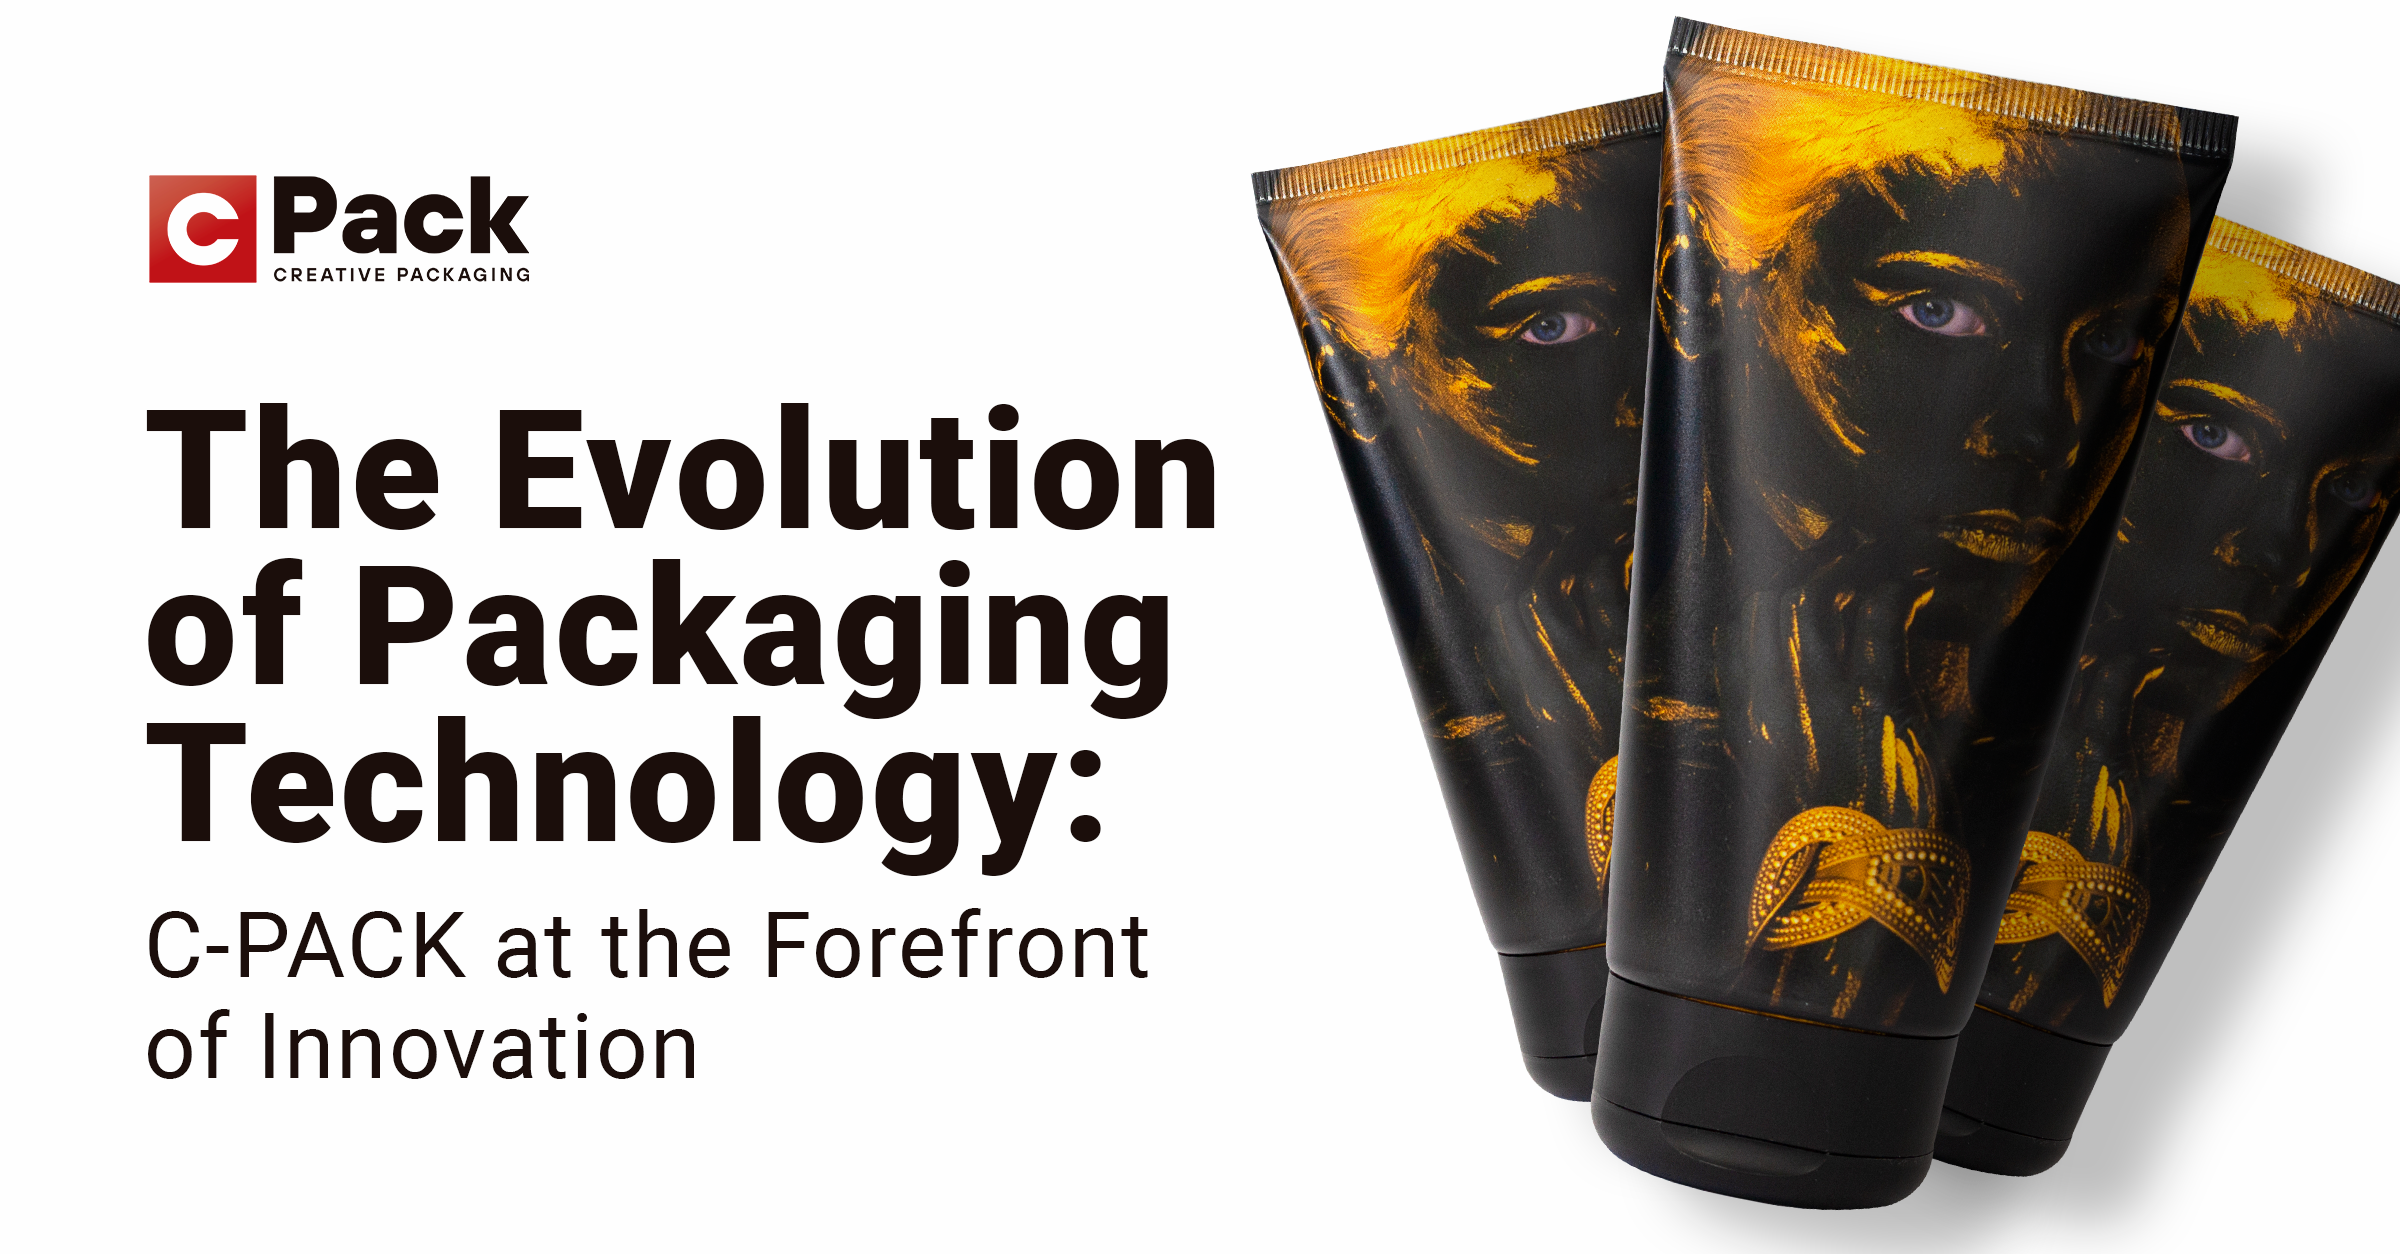 The Evolution of Packaging Technology: C-PACK at the Forefront of Innovation